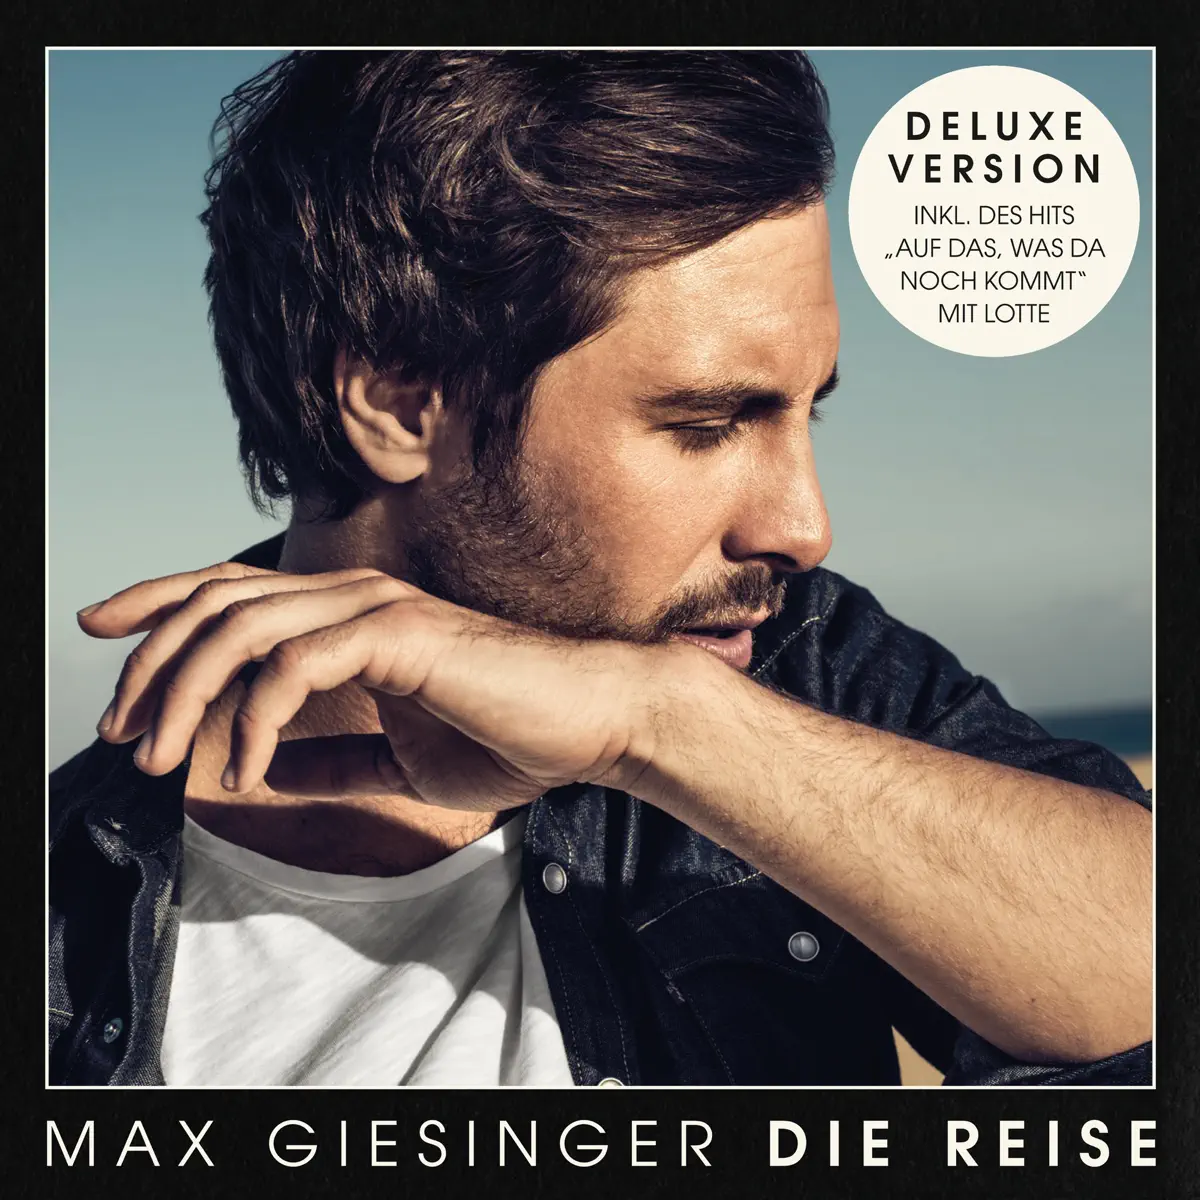 Max Giesinger - Die Reise (Deluxe Edition) (2018) [iTunes Plus AAC M4A]-新房子